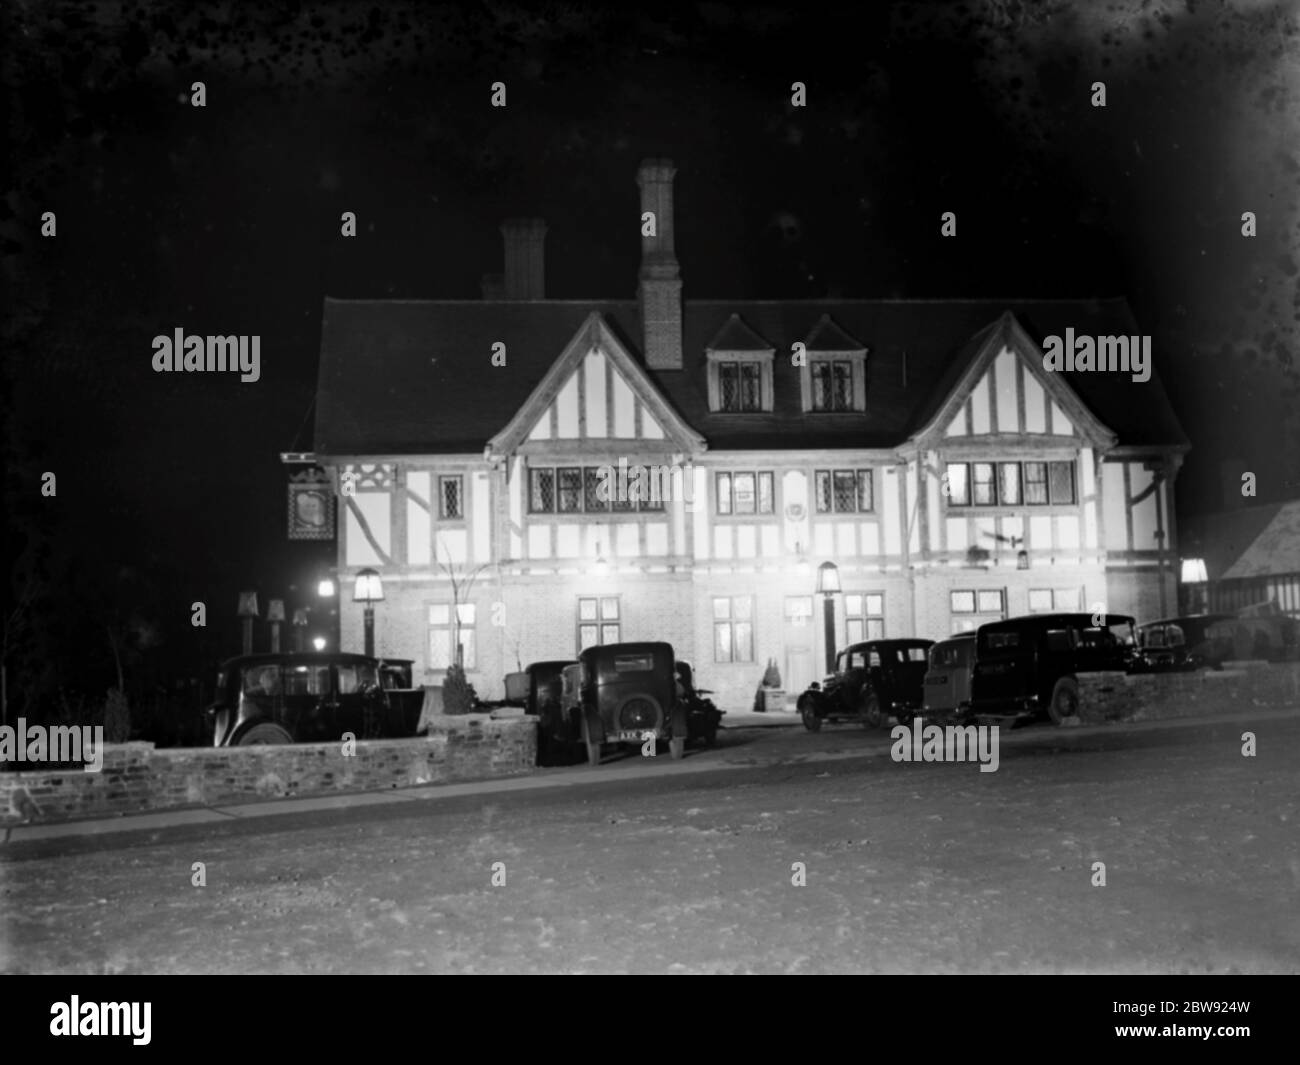 A fleet of Vauxhall cars parked in fornt of the Daylight Inn in Petts Wood , Kent . 1936 Stock Photo